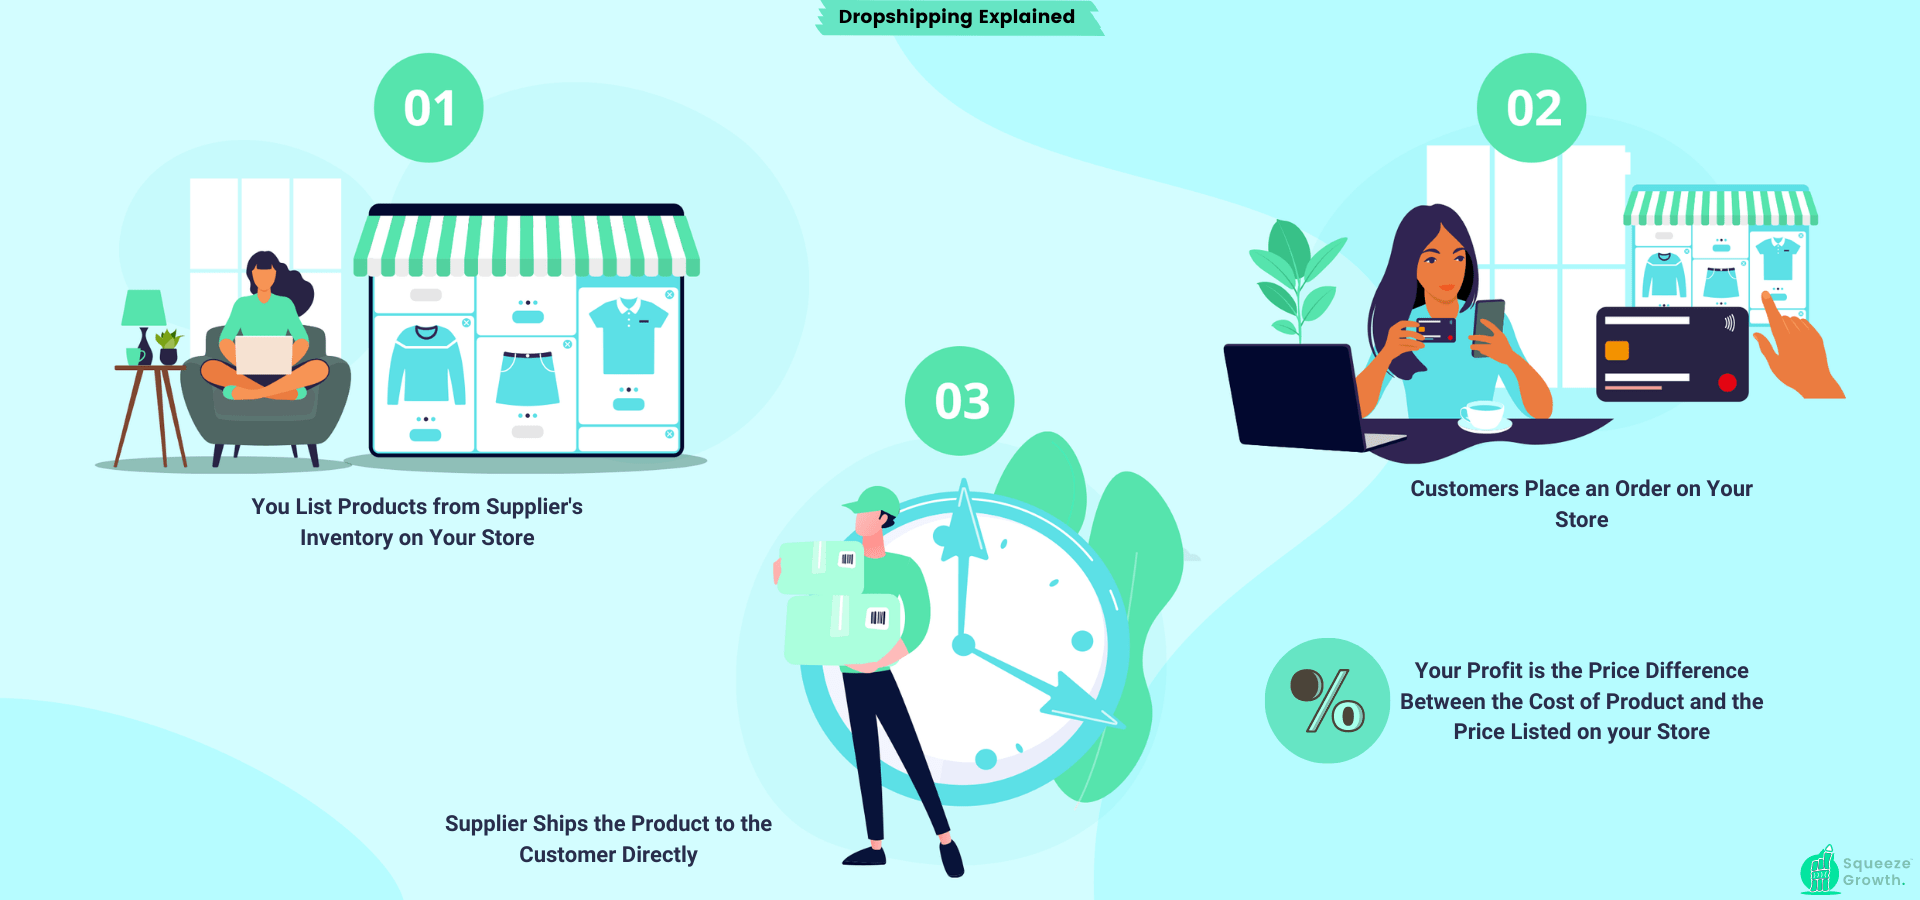 dropshipping explained graphic by SqueezeGrowth